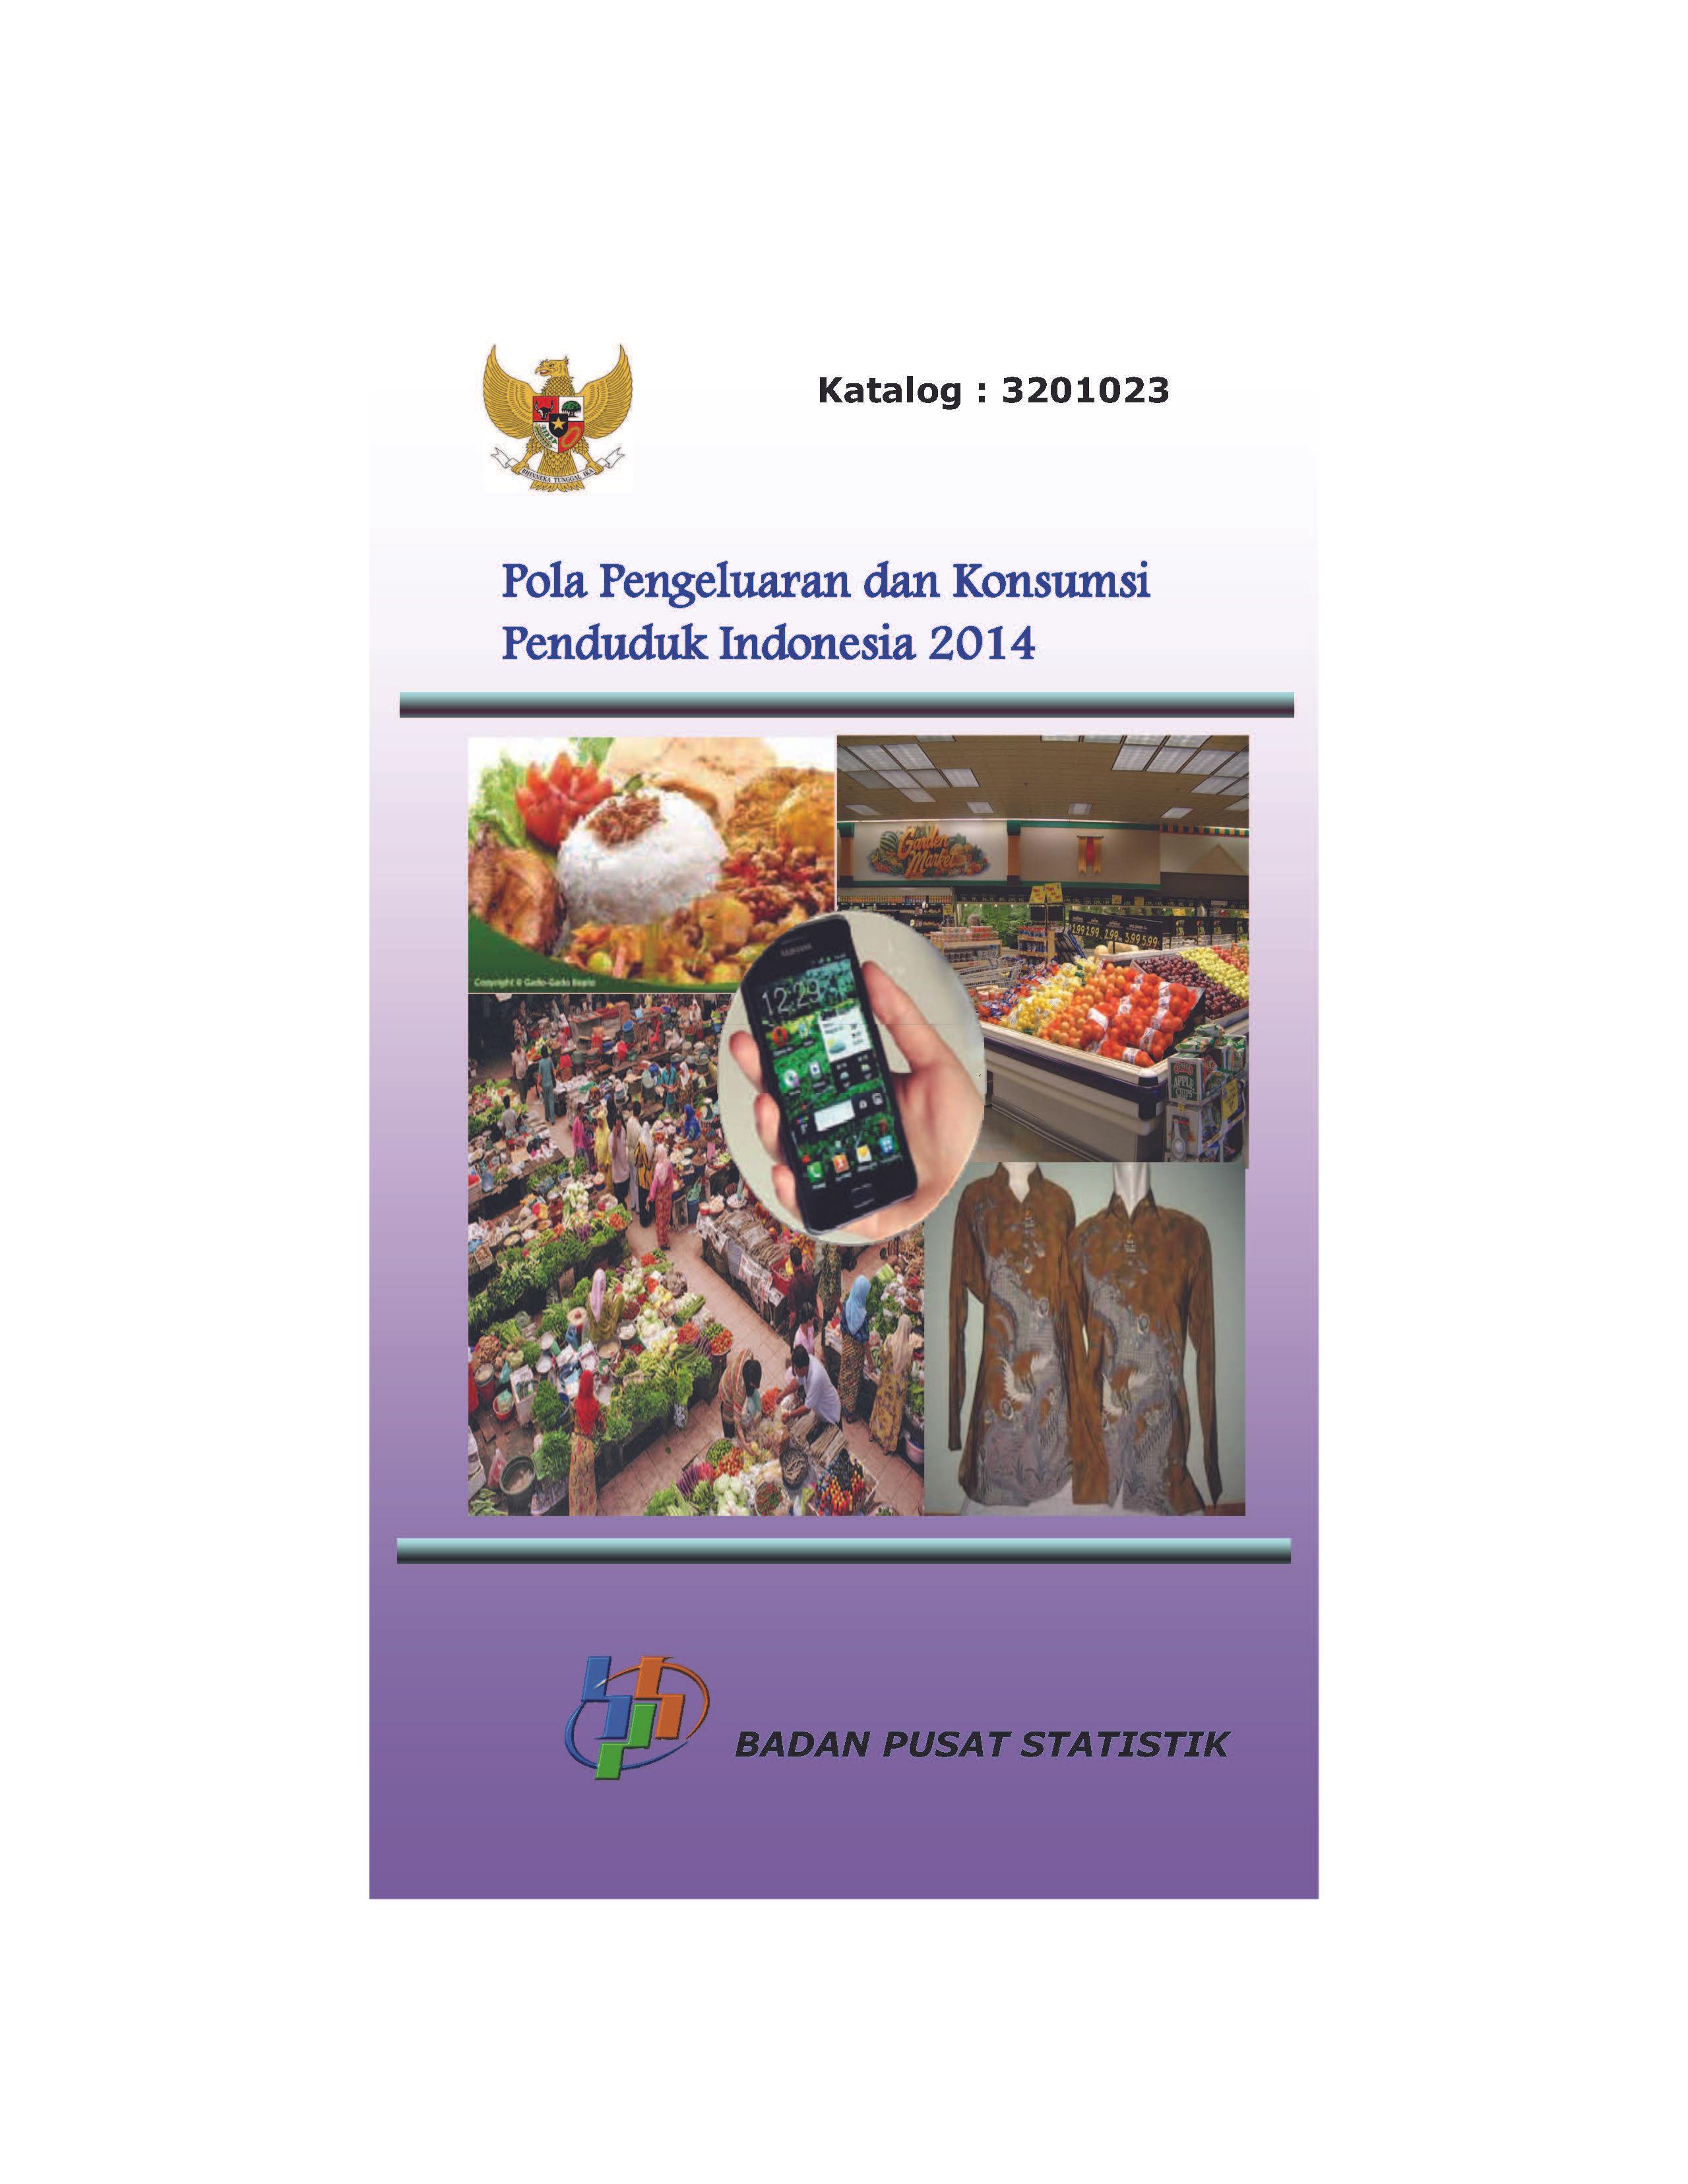 Pattern of Consumption and Expenditure of Indonesia 2014